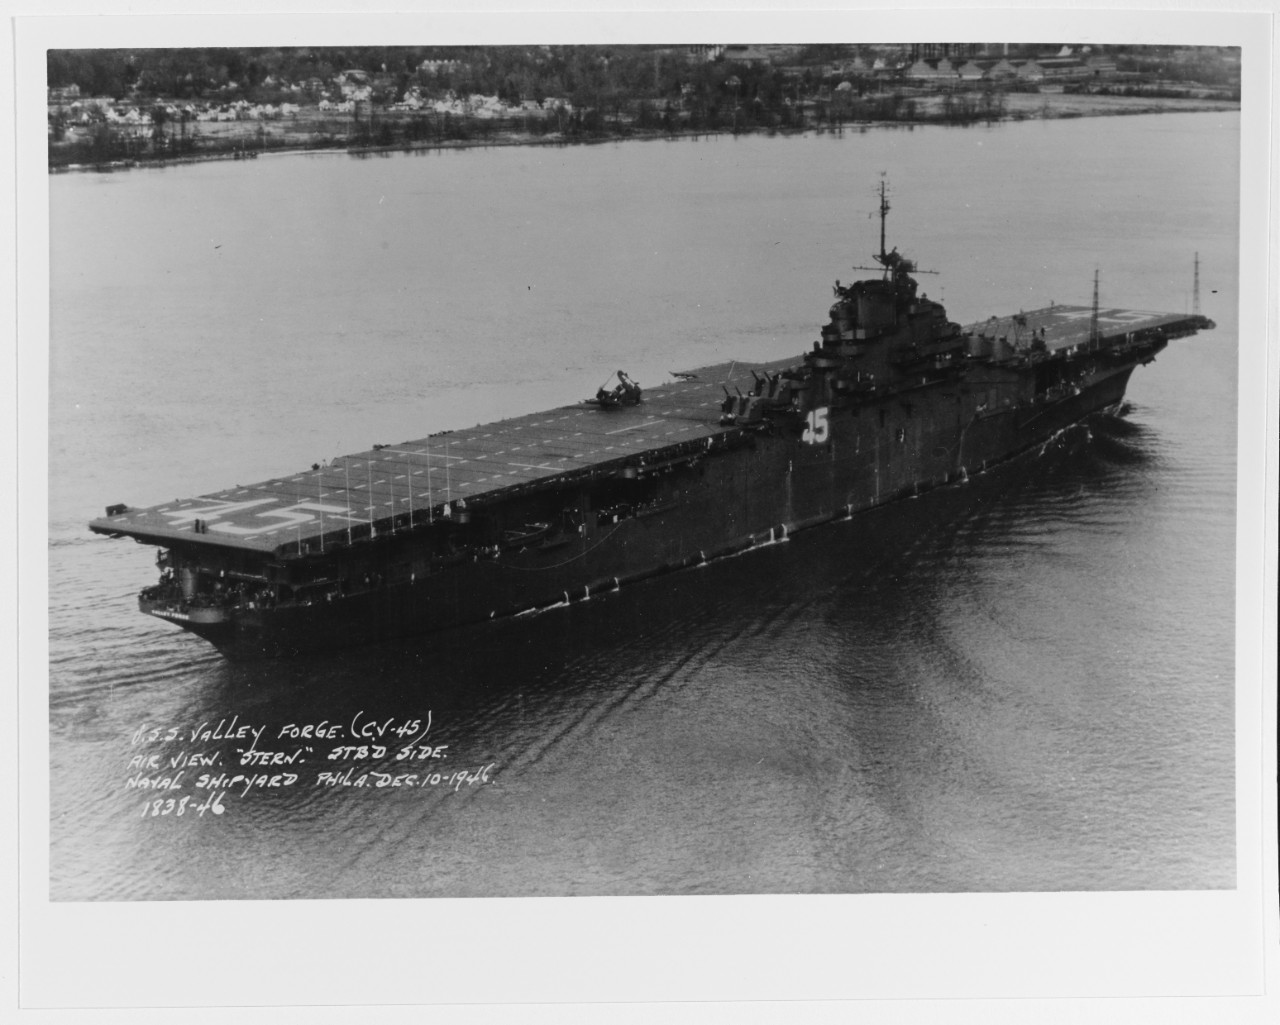 Photo #: NH 95361  USS Valley Forge (CV-45)